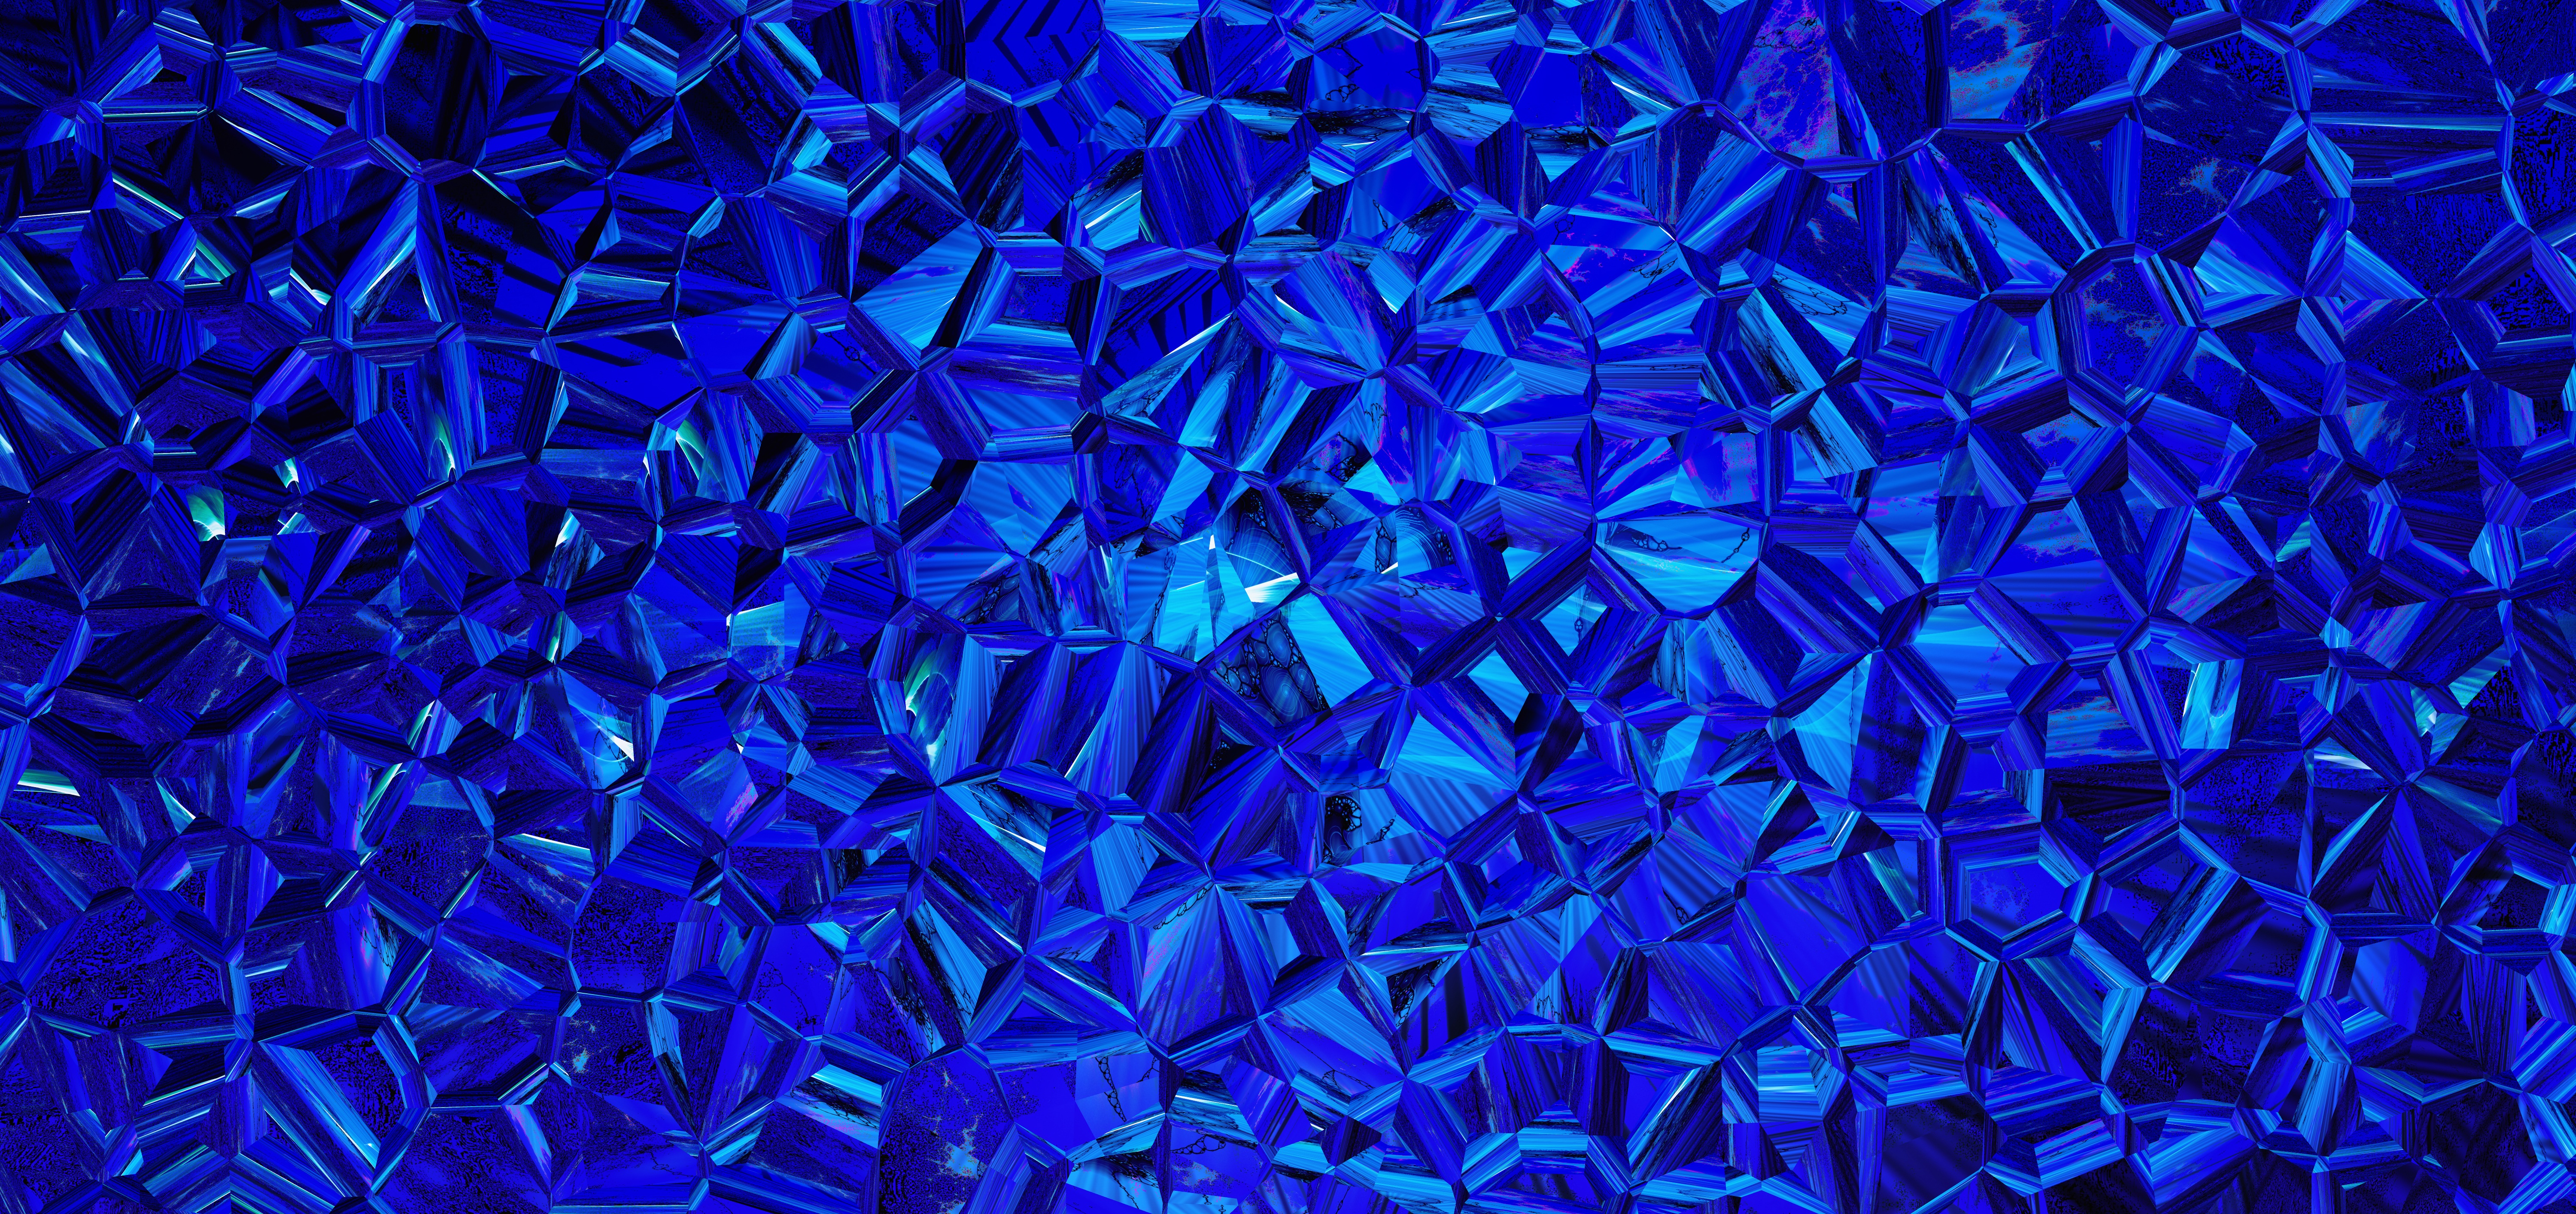 Windows Backgrounds texture, textures, blue, prismatic, triangles, prism, polygons